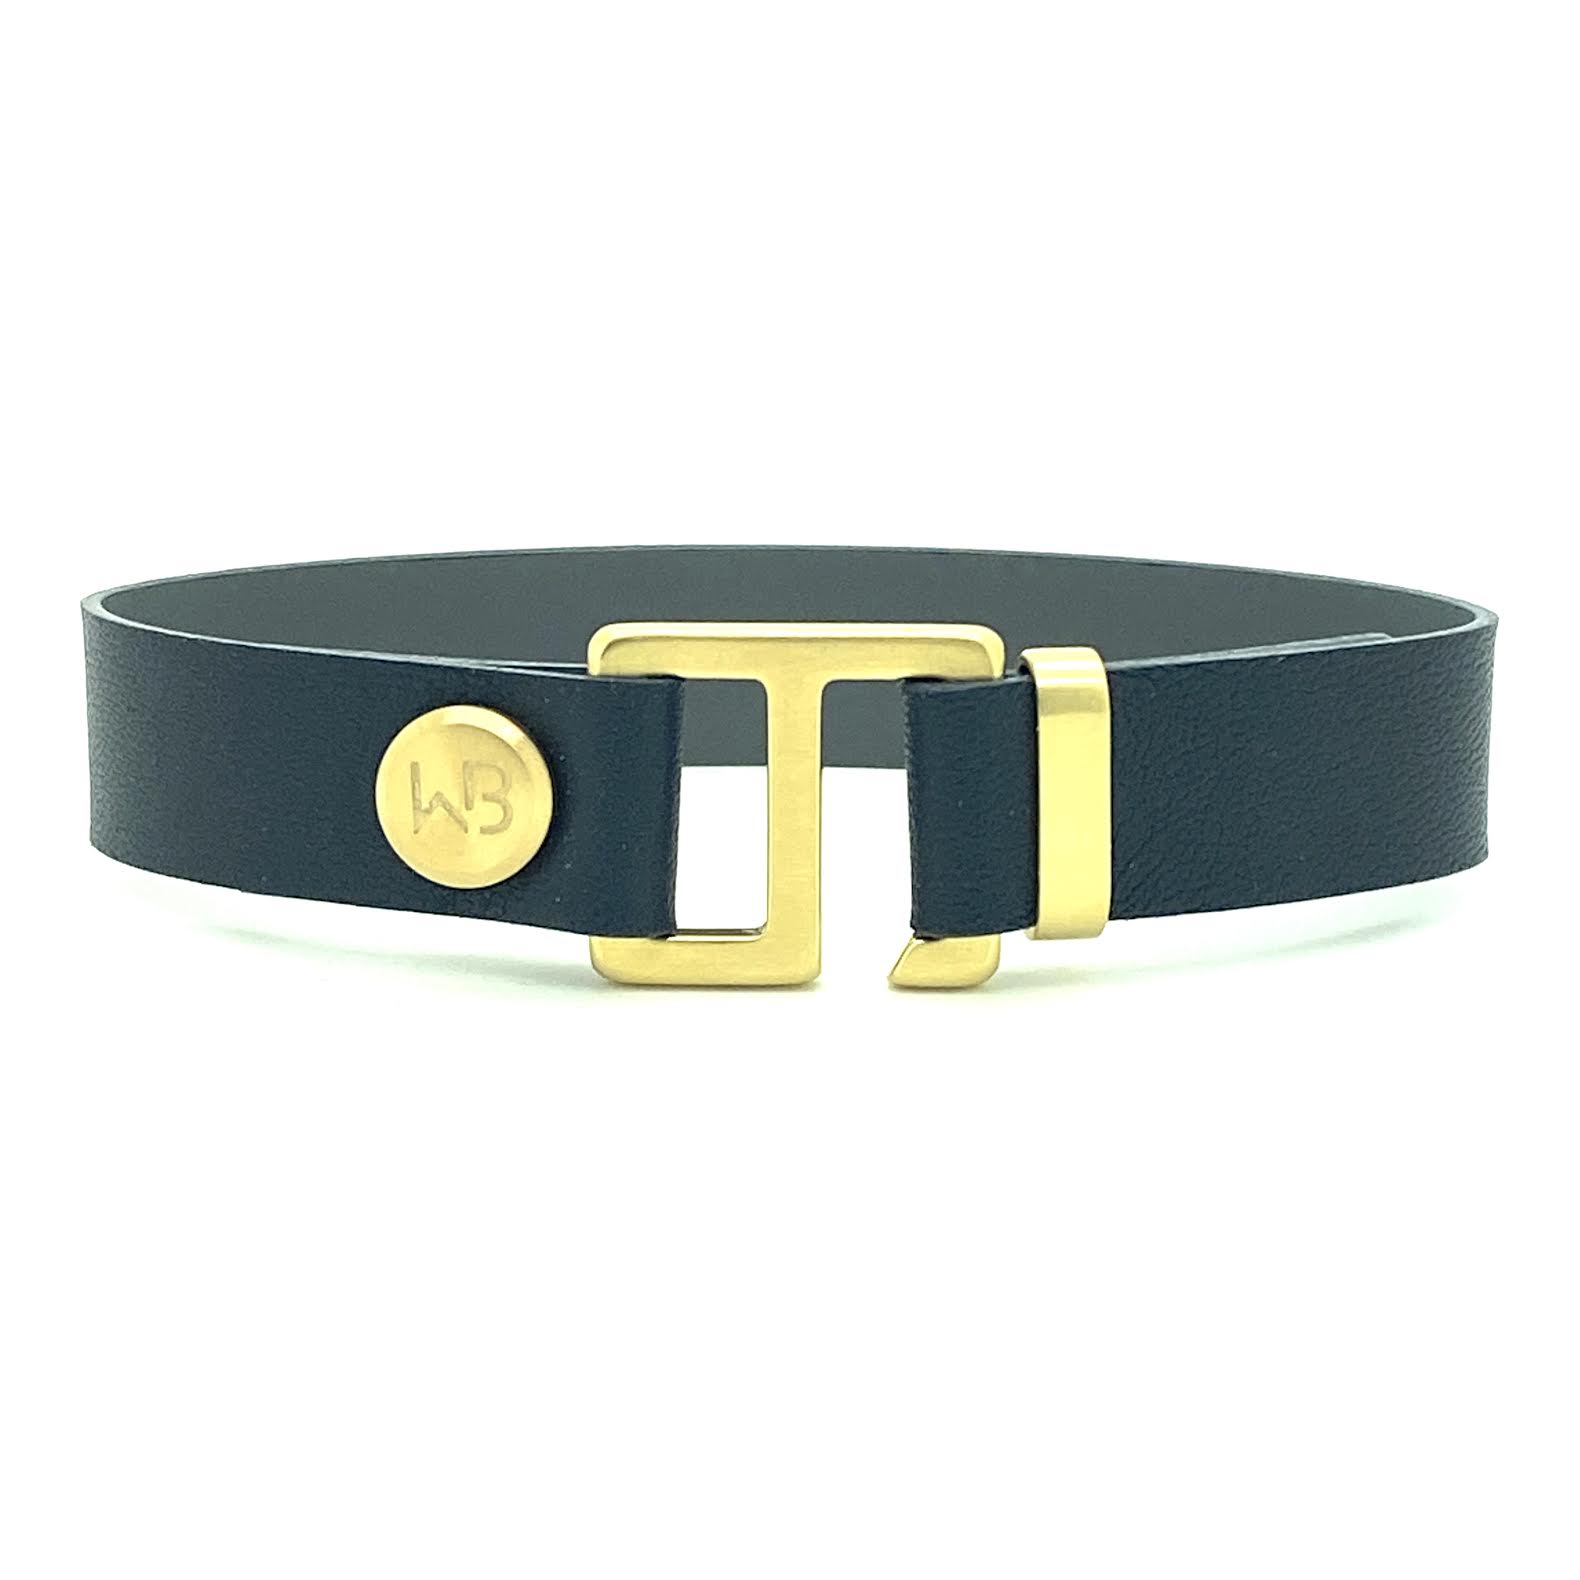 Our striking navy blue/charcoal grey leather cuff bracelet is paired perfectly with your choice of our artisan designed brushed hardware. Choices include rose gold, yellow gold, stainless steel or black ceramic. This adjustable size bracelet is a distinctive piece worn alone or with a WristBend stacking bracelet.  Made by WristBend